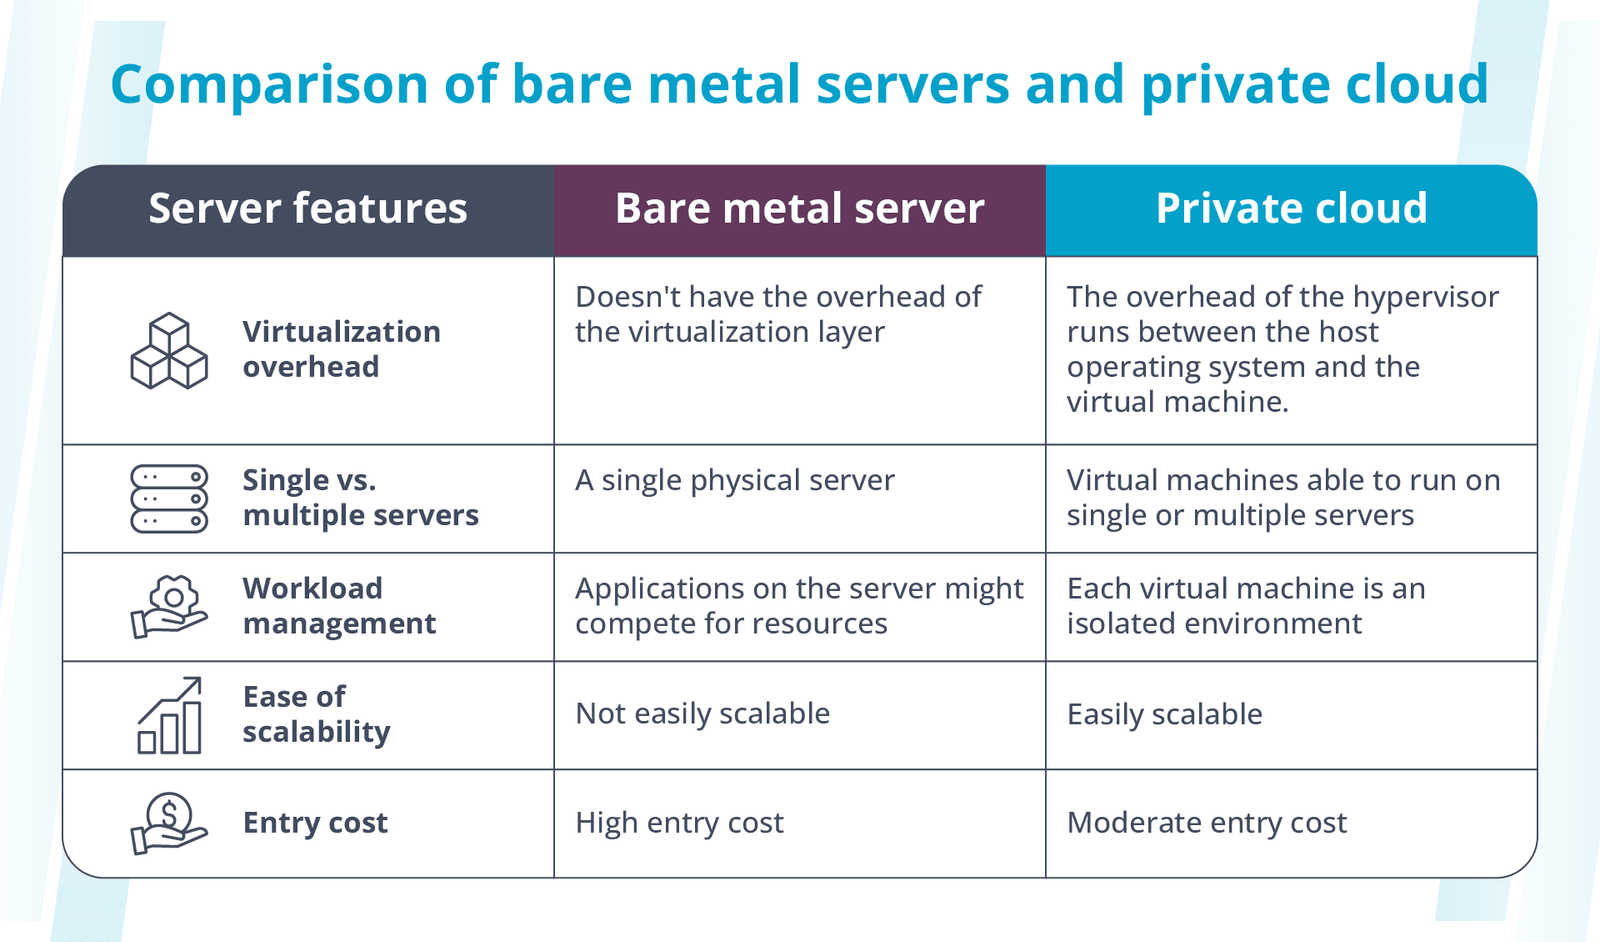 Here, we compare bare metal servers with private cloud servers.